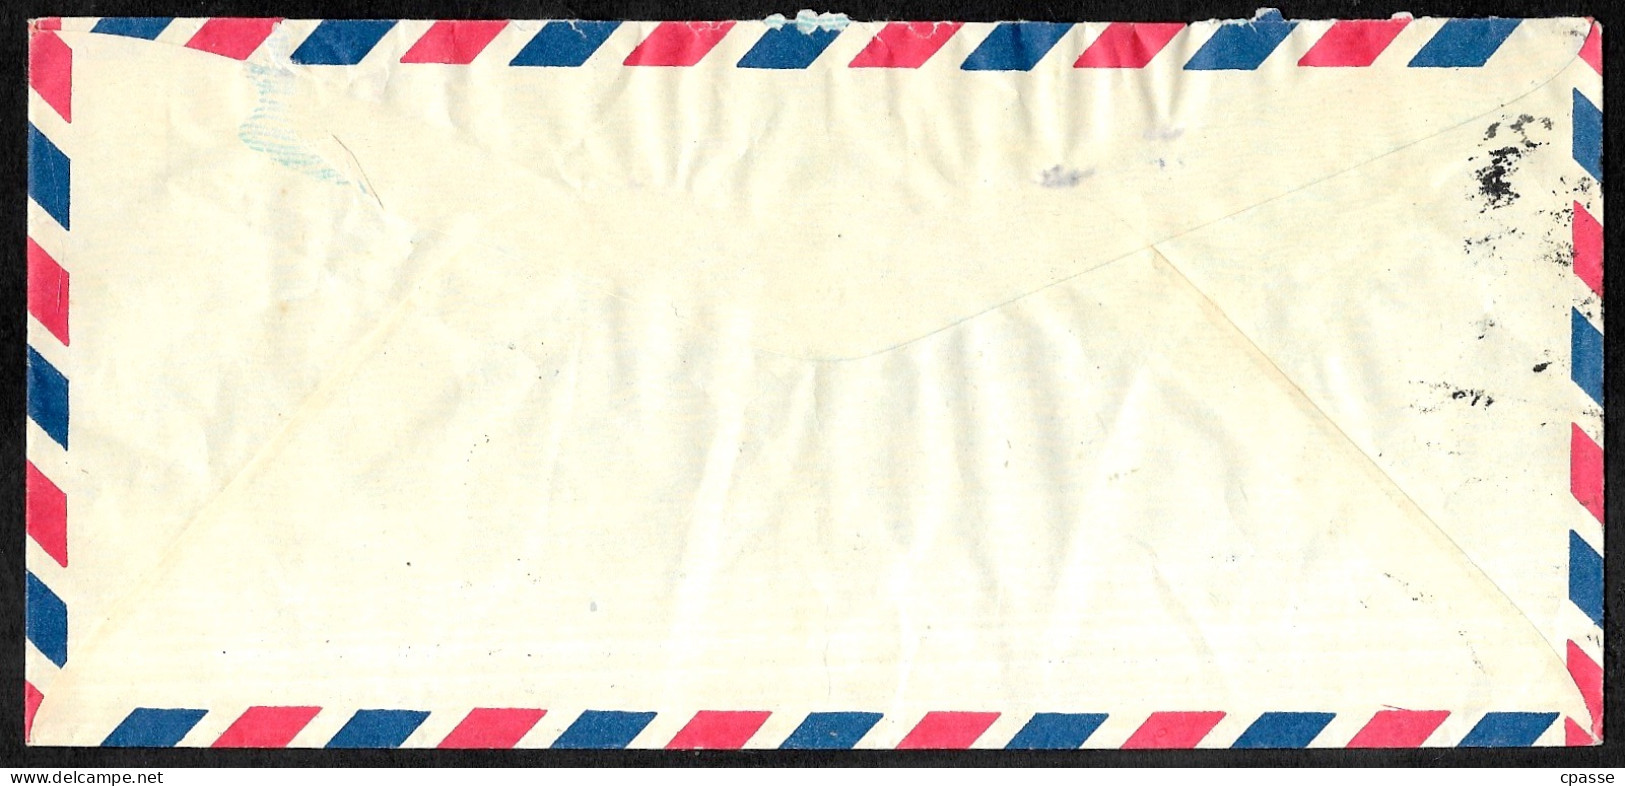 1979 Lettre (5 Stamps) Republic Of CHINA TAIWAN (Formose) Taipei To France POSTE AERIENNE By Air Mail - Posta Aerea